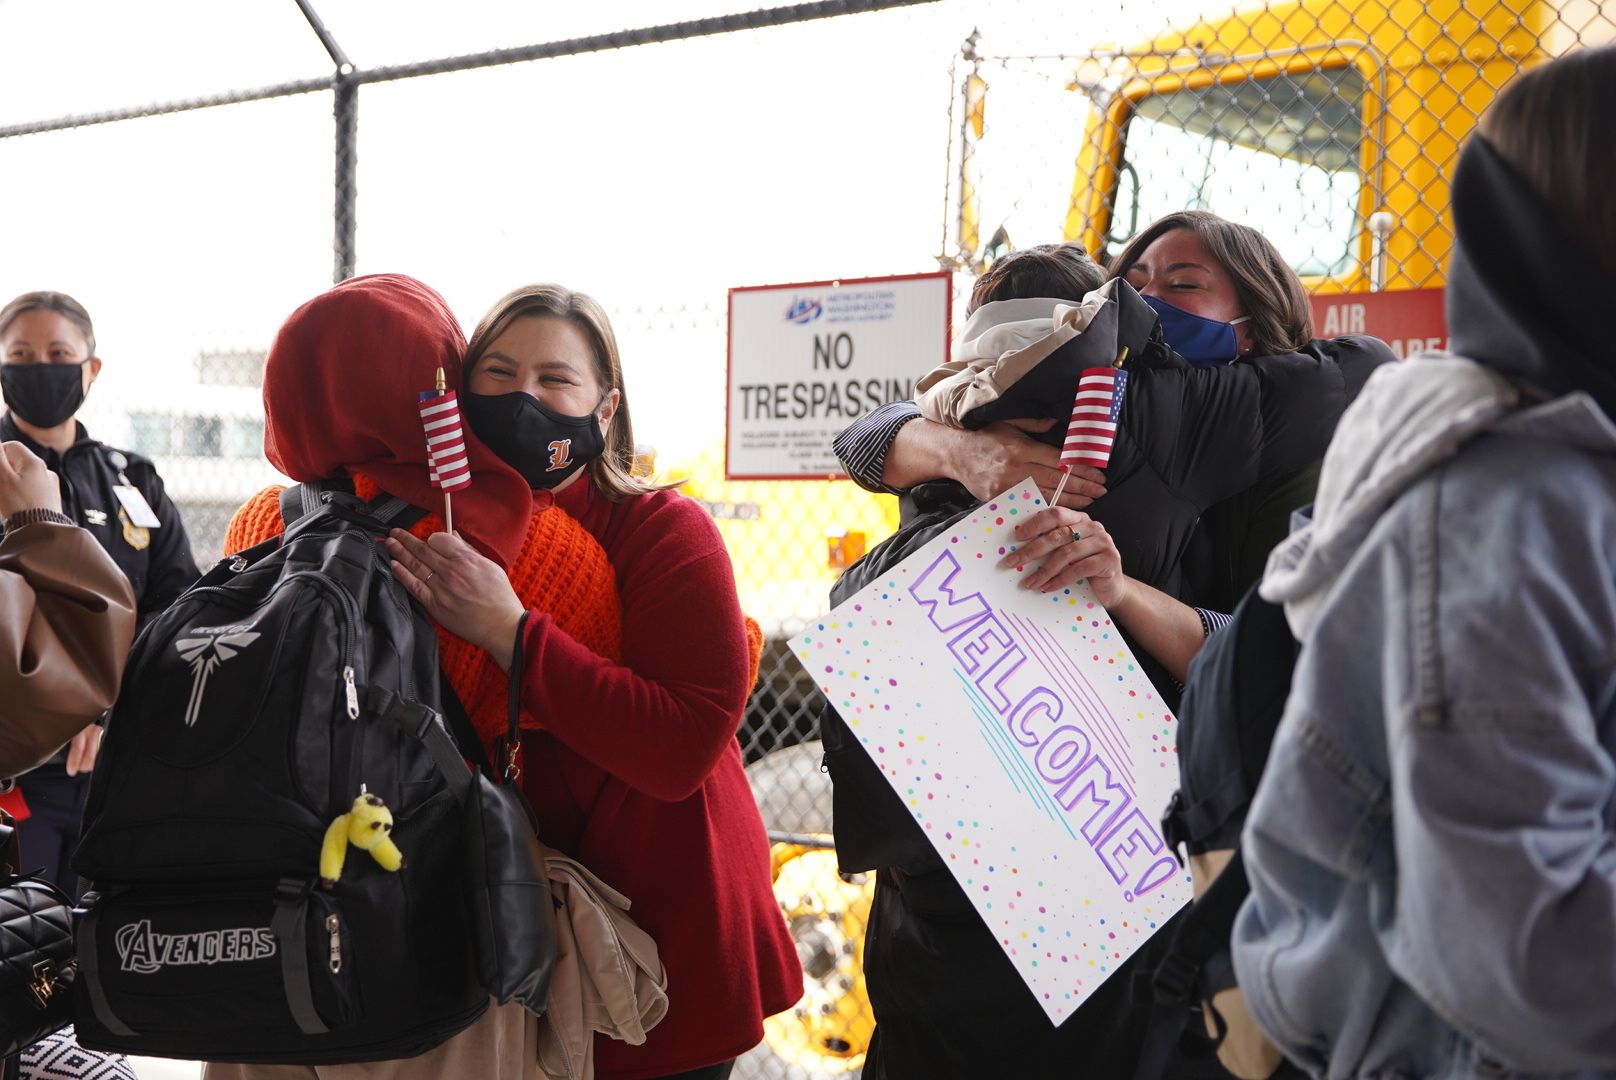 Two groups of people embrace outside of an airport. They hold an American flag and a "welcome" sign.